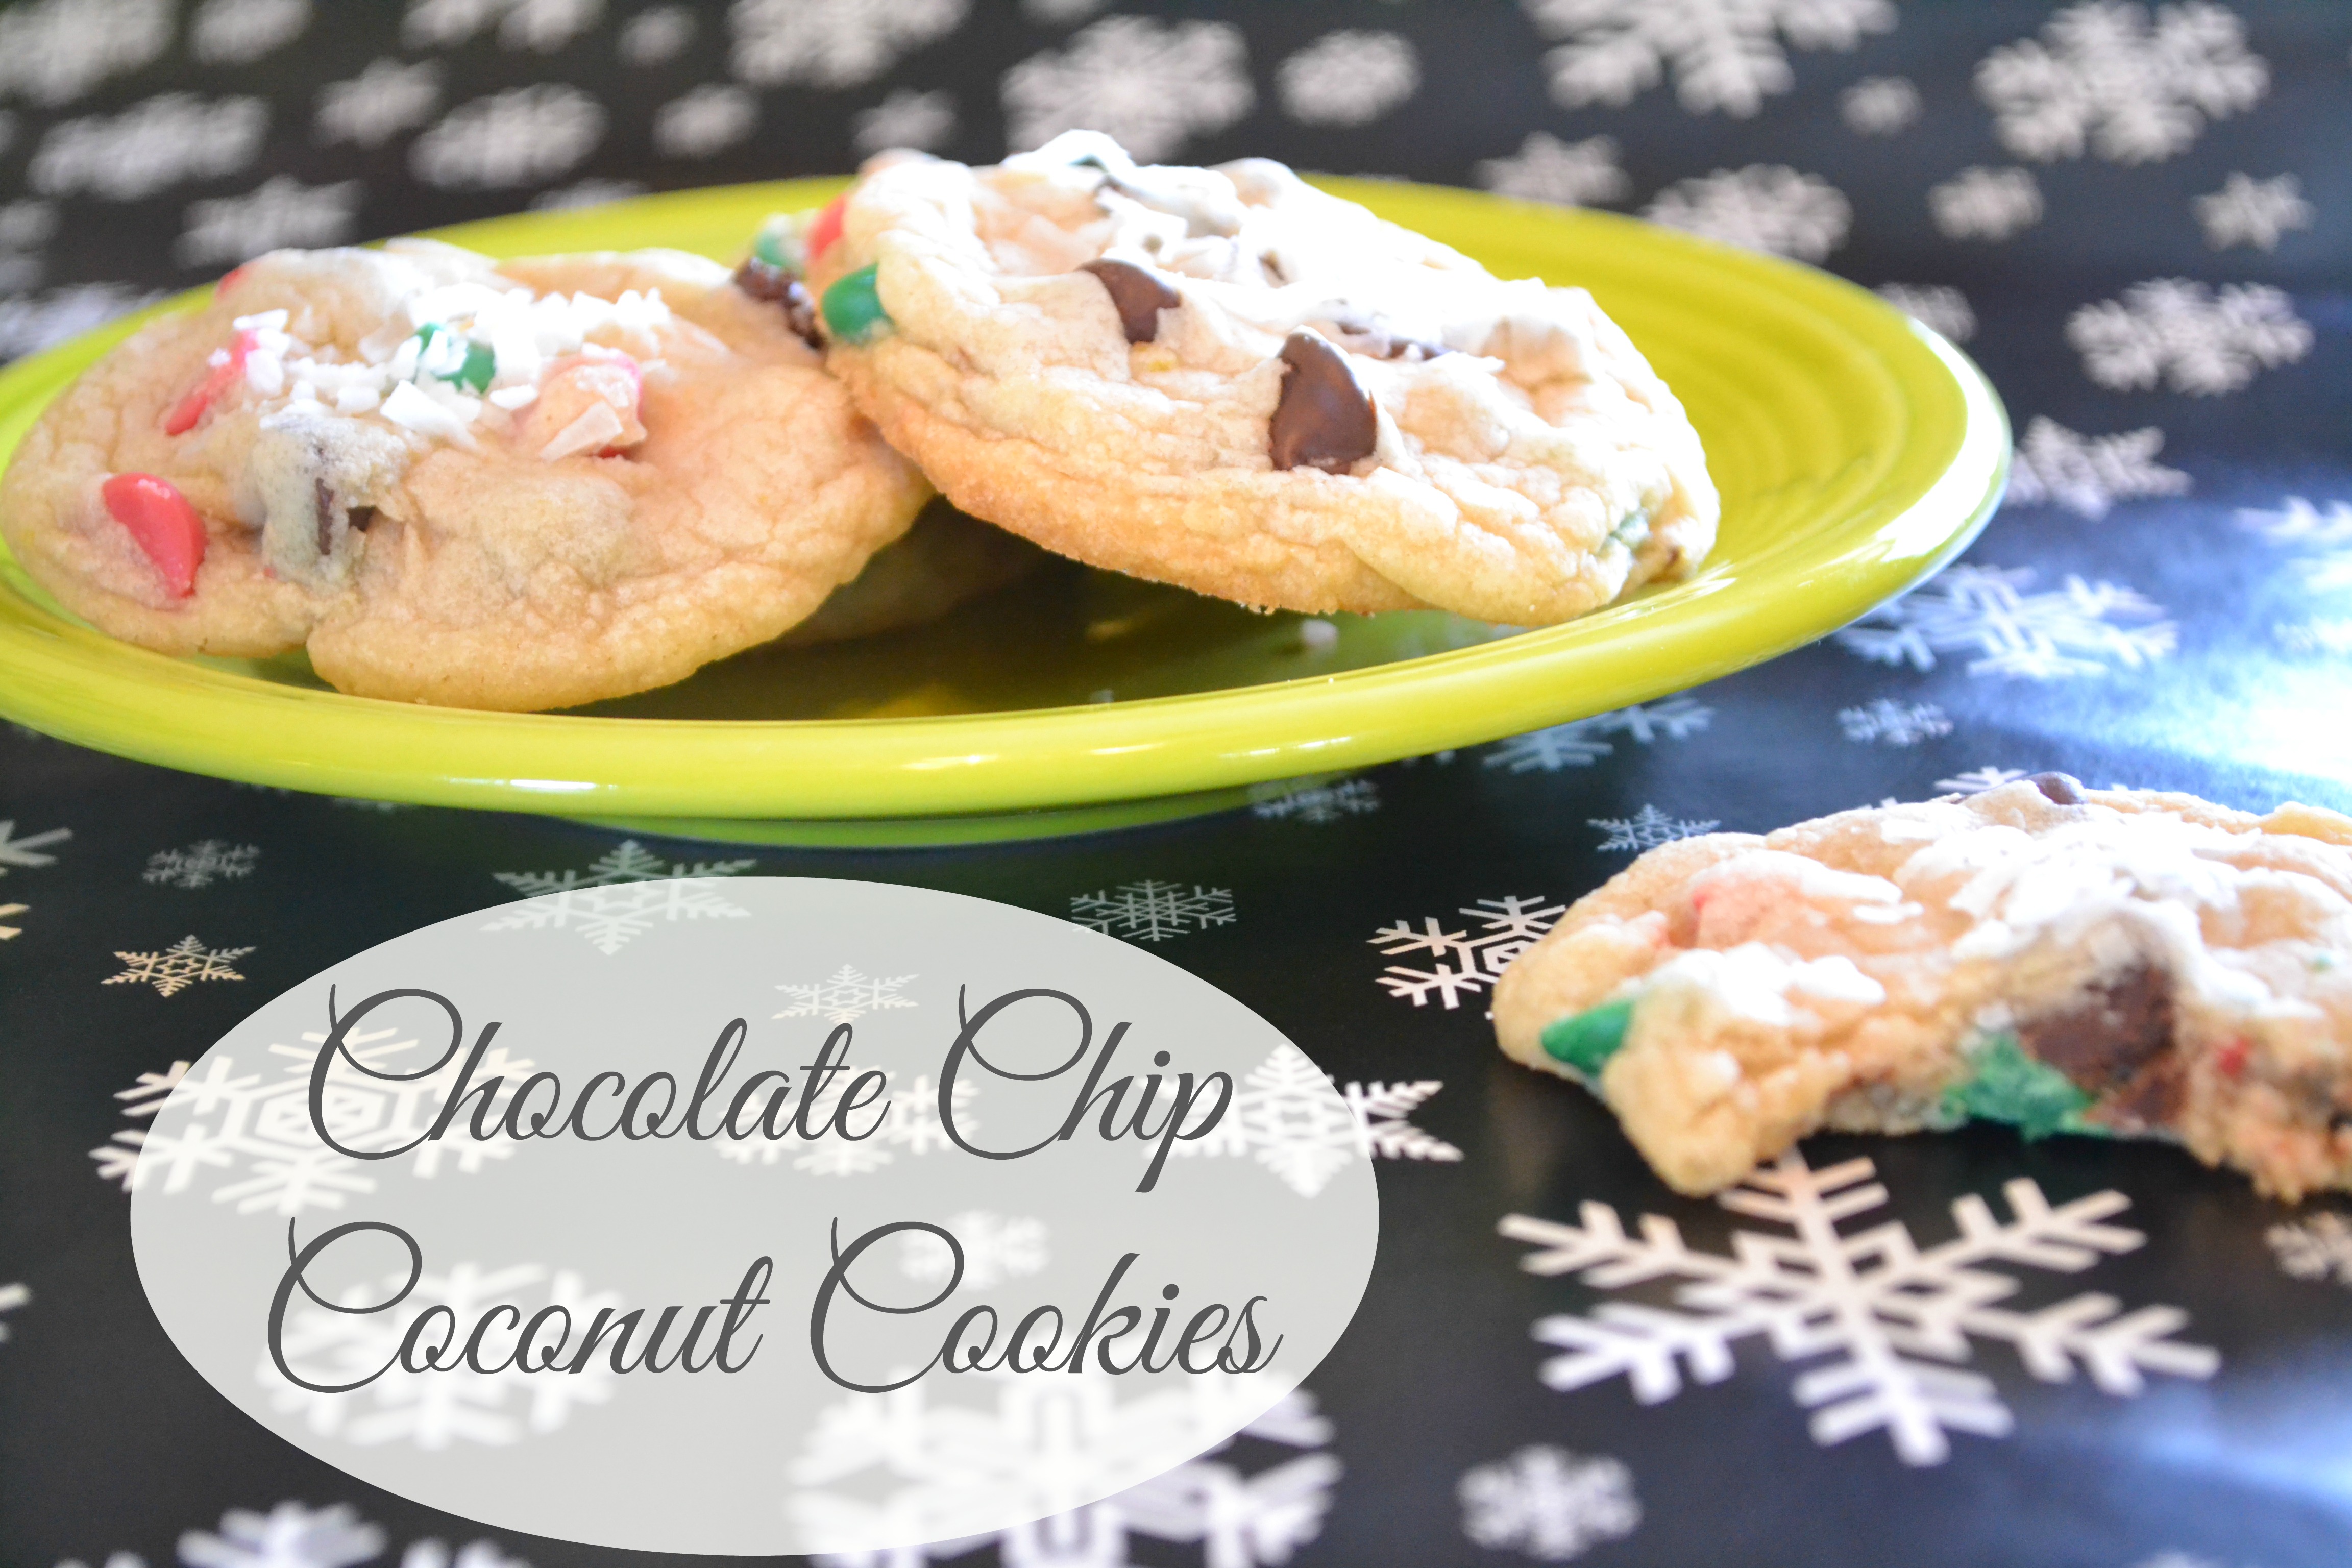 http://www.thedomesticgeekblog.com/wp-content/uploads/2013/11/chocolate-chip-coconut-cookies2.jpg